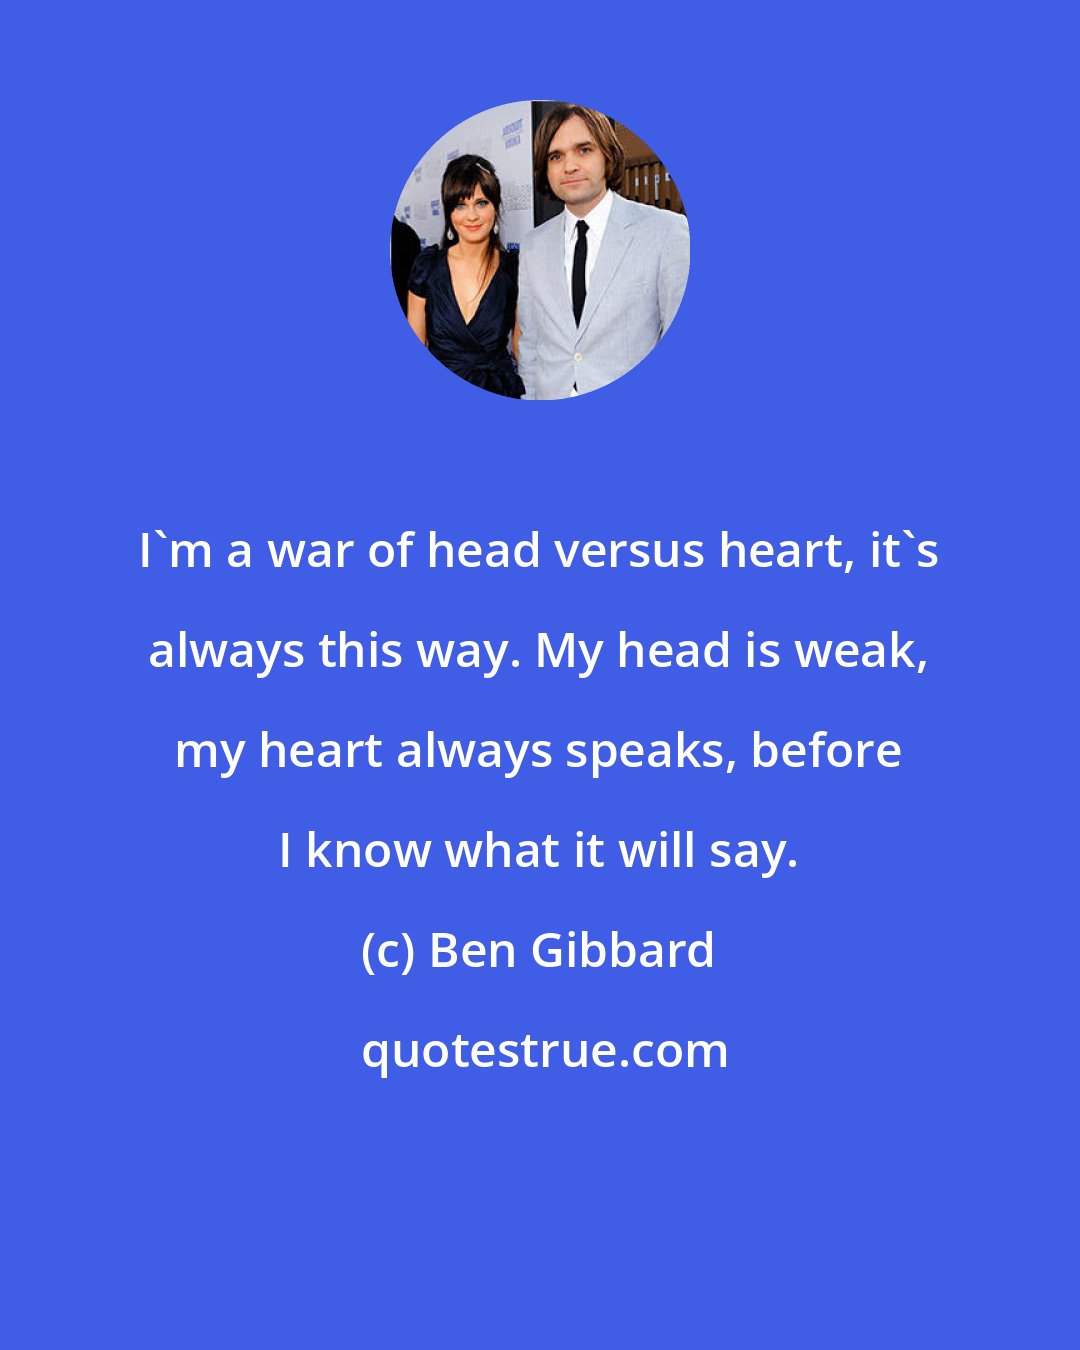 Ben Gibbard: I'm a war of head versus heart, it's always this way. My head is weak, my heart always speaks, before I know what it will say.